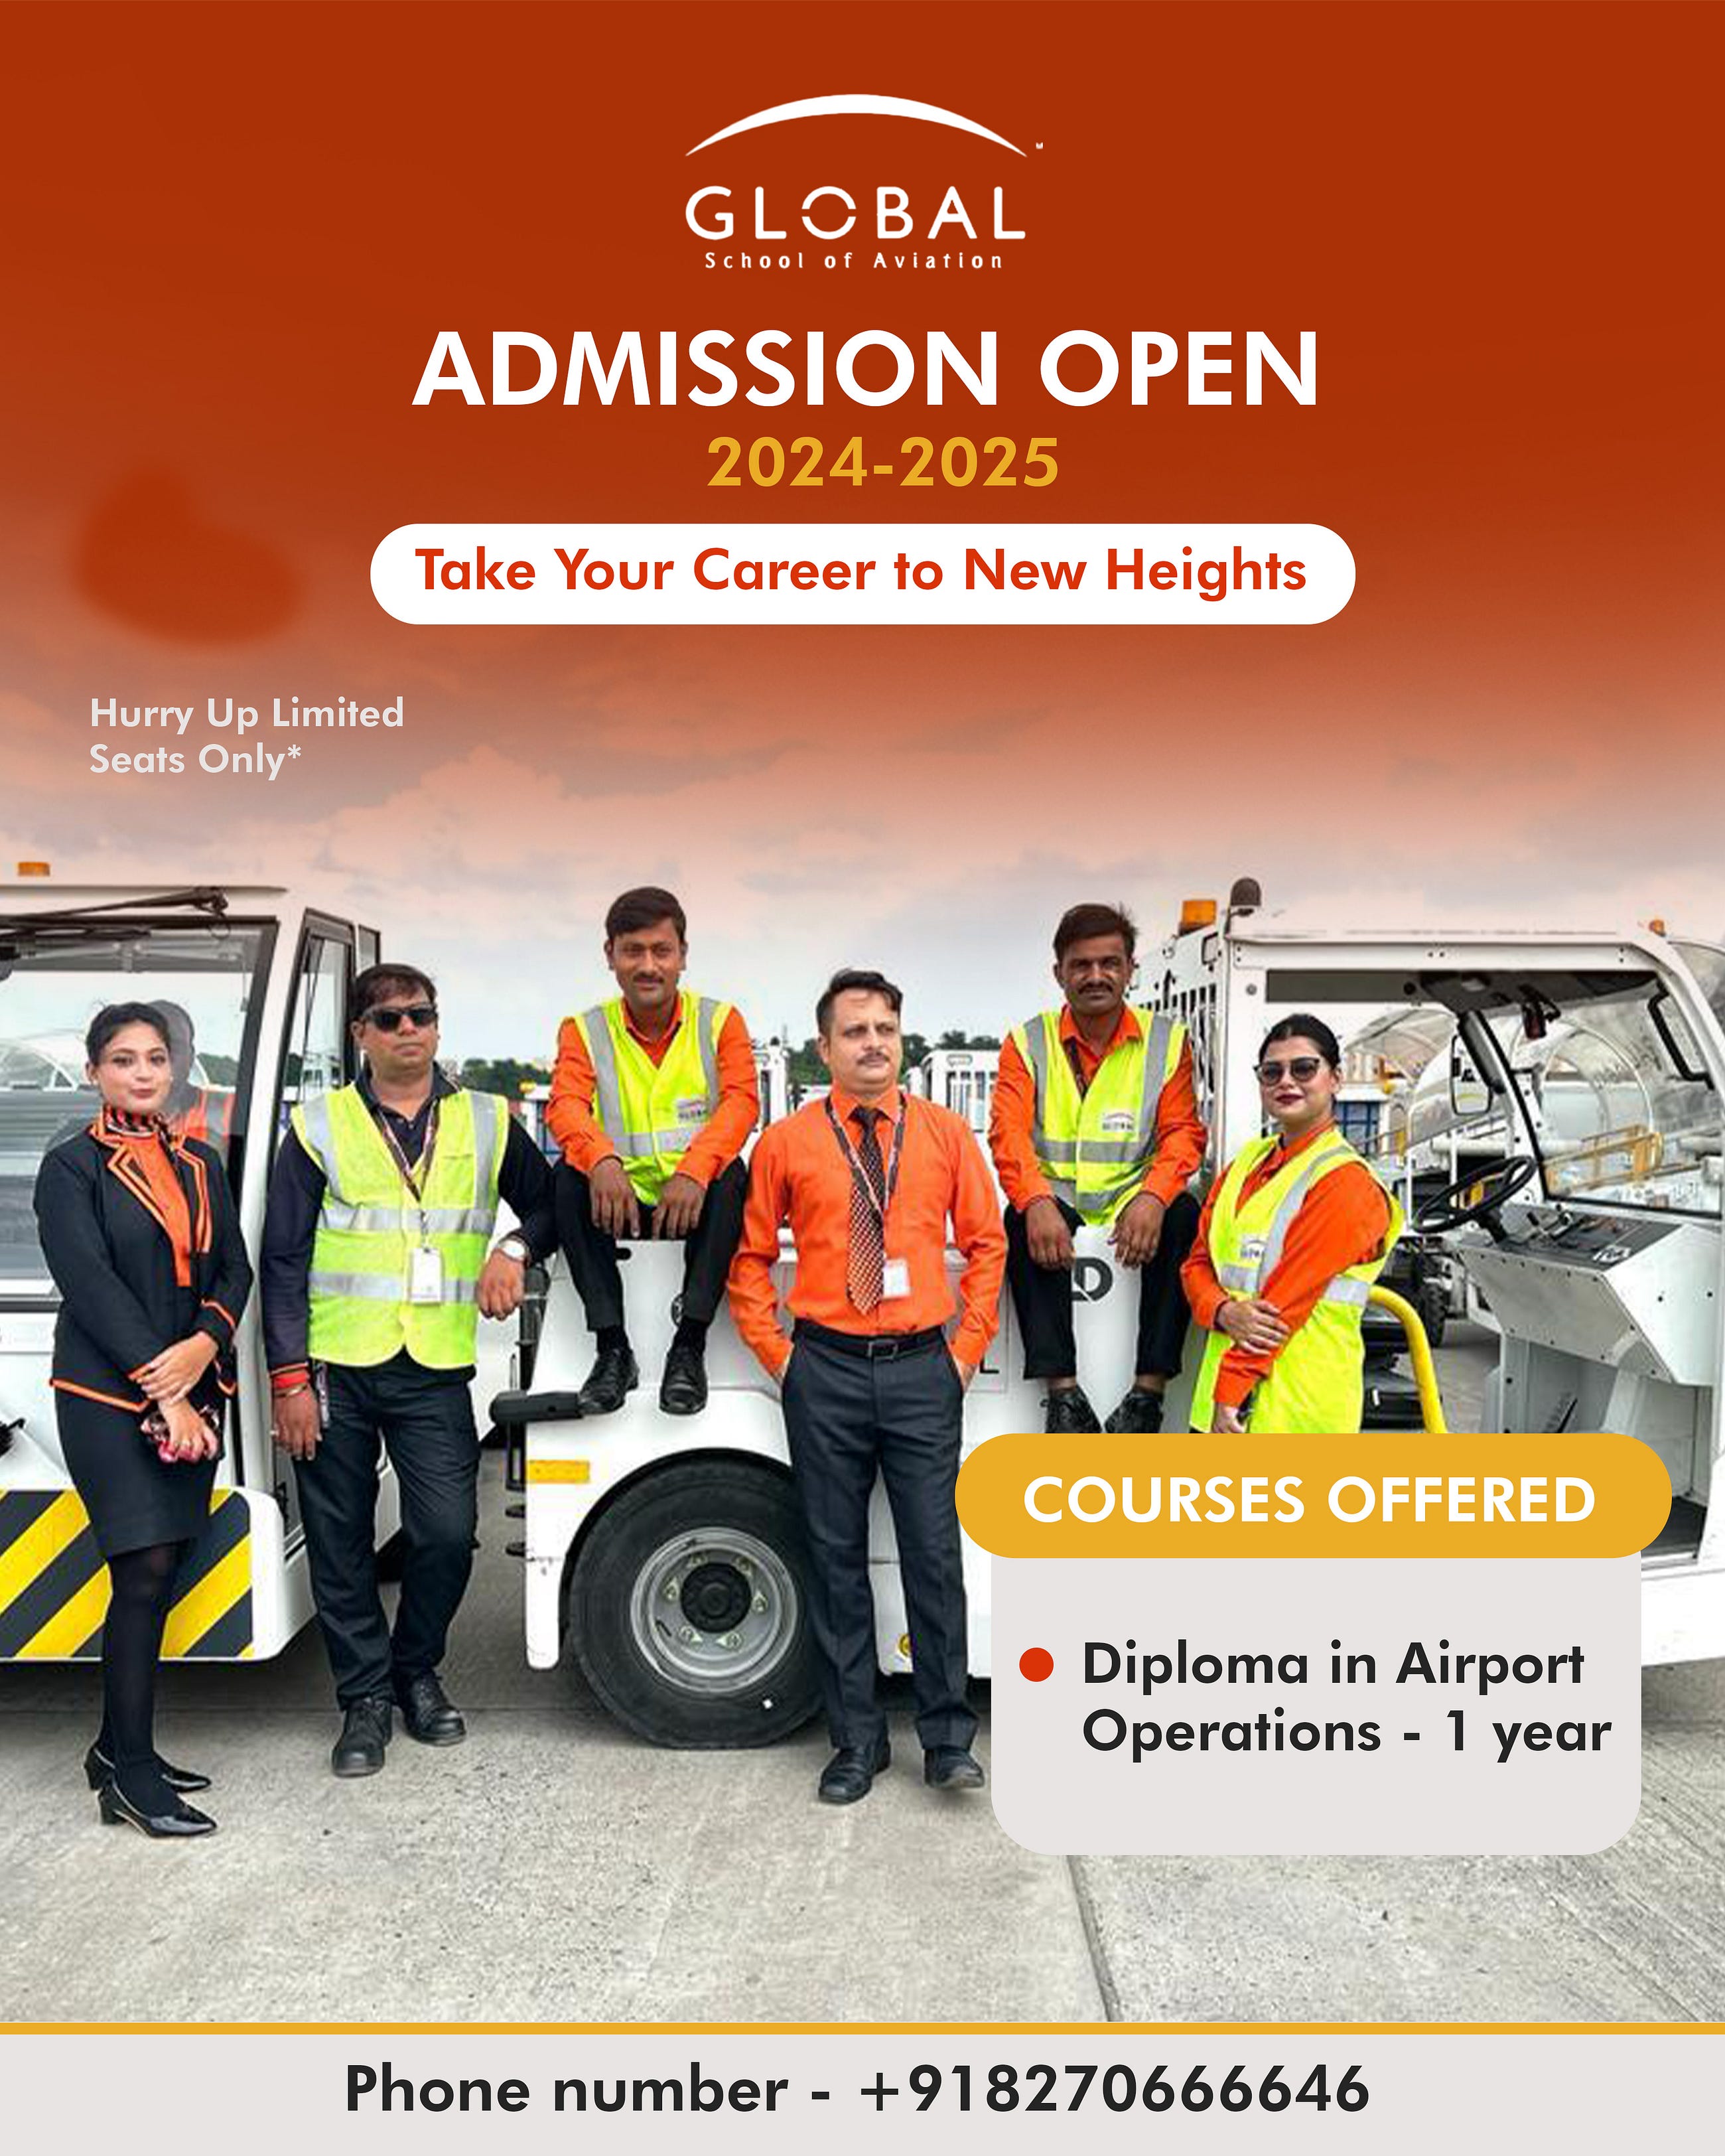 Fly High with Our 1-Year Airport Operations Diploma